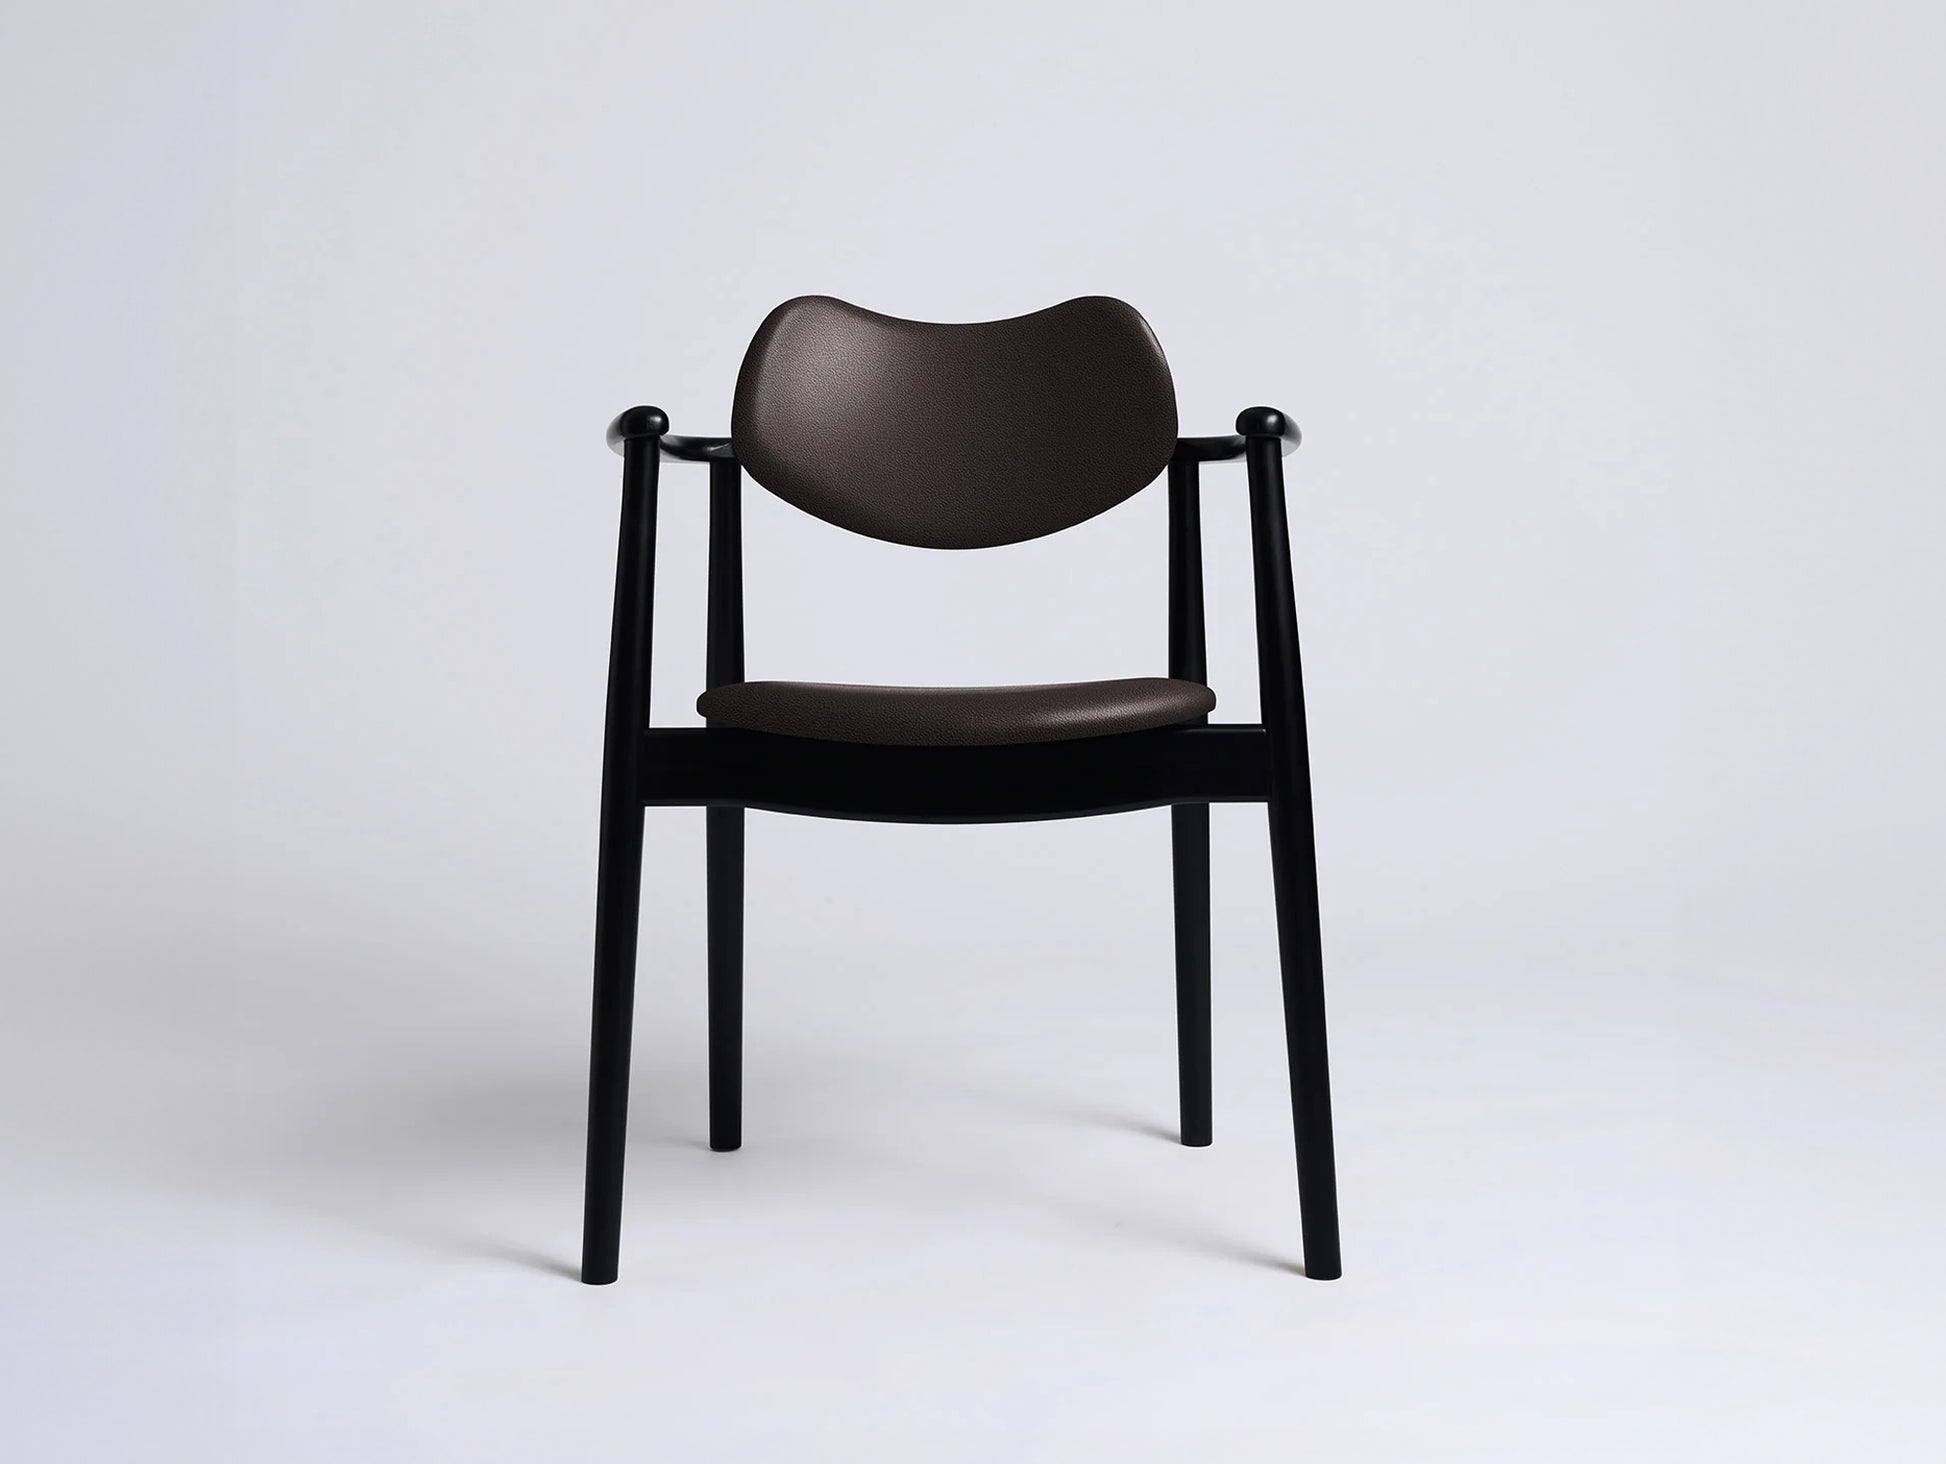 Regatta Chair Seat and Back Upholstered by Ro Collection - Black Lacquered Beech / Standard Sierra Dark Brown Leather